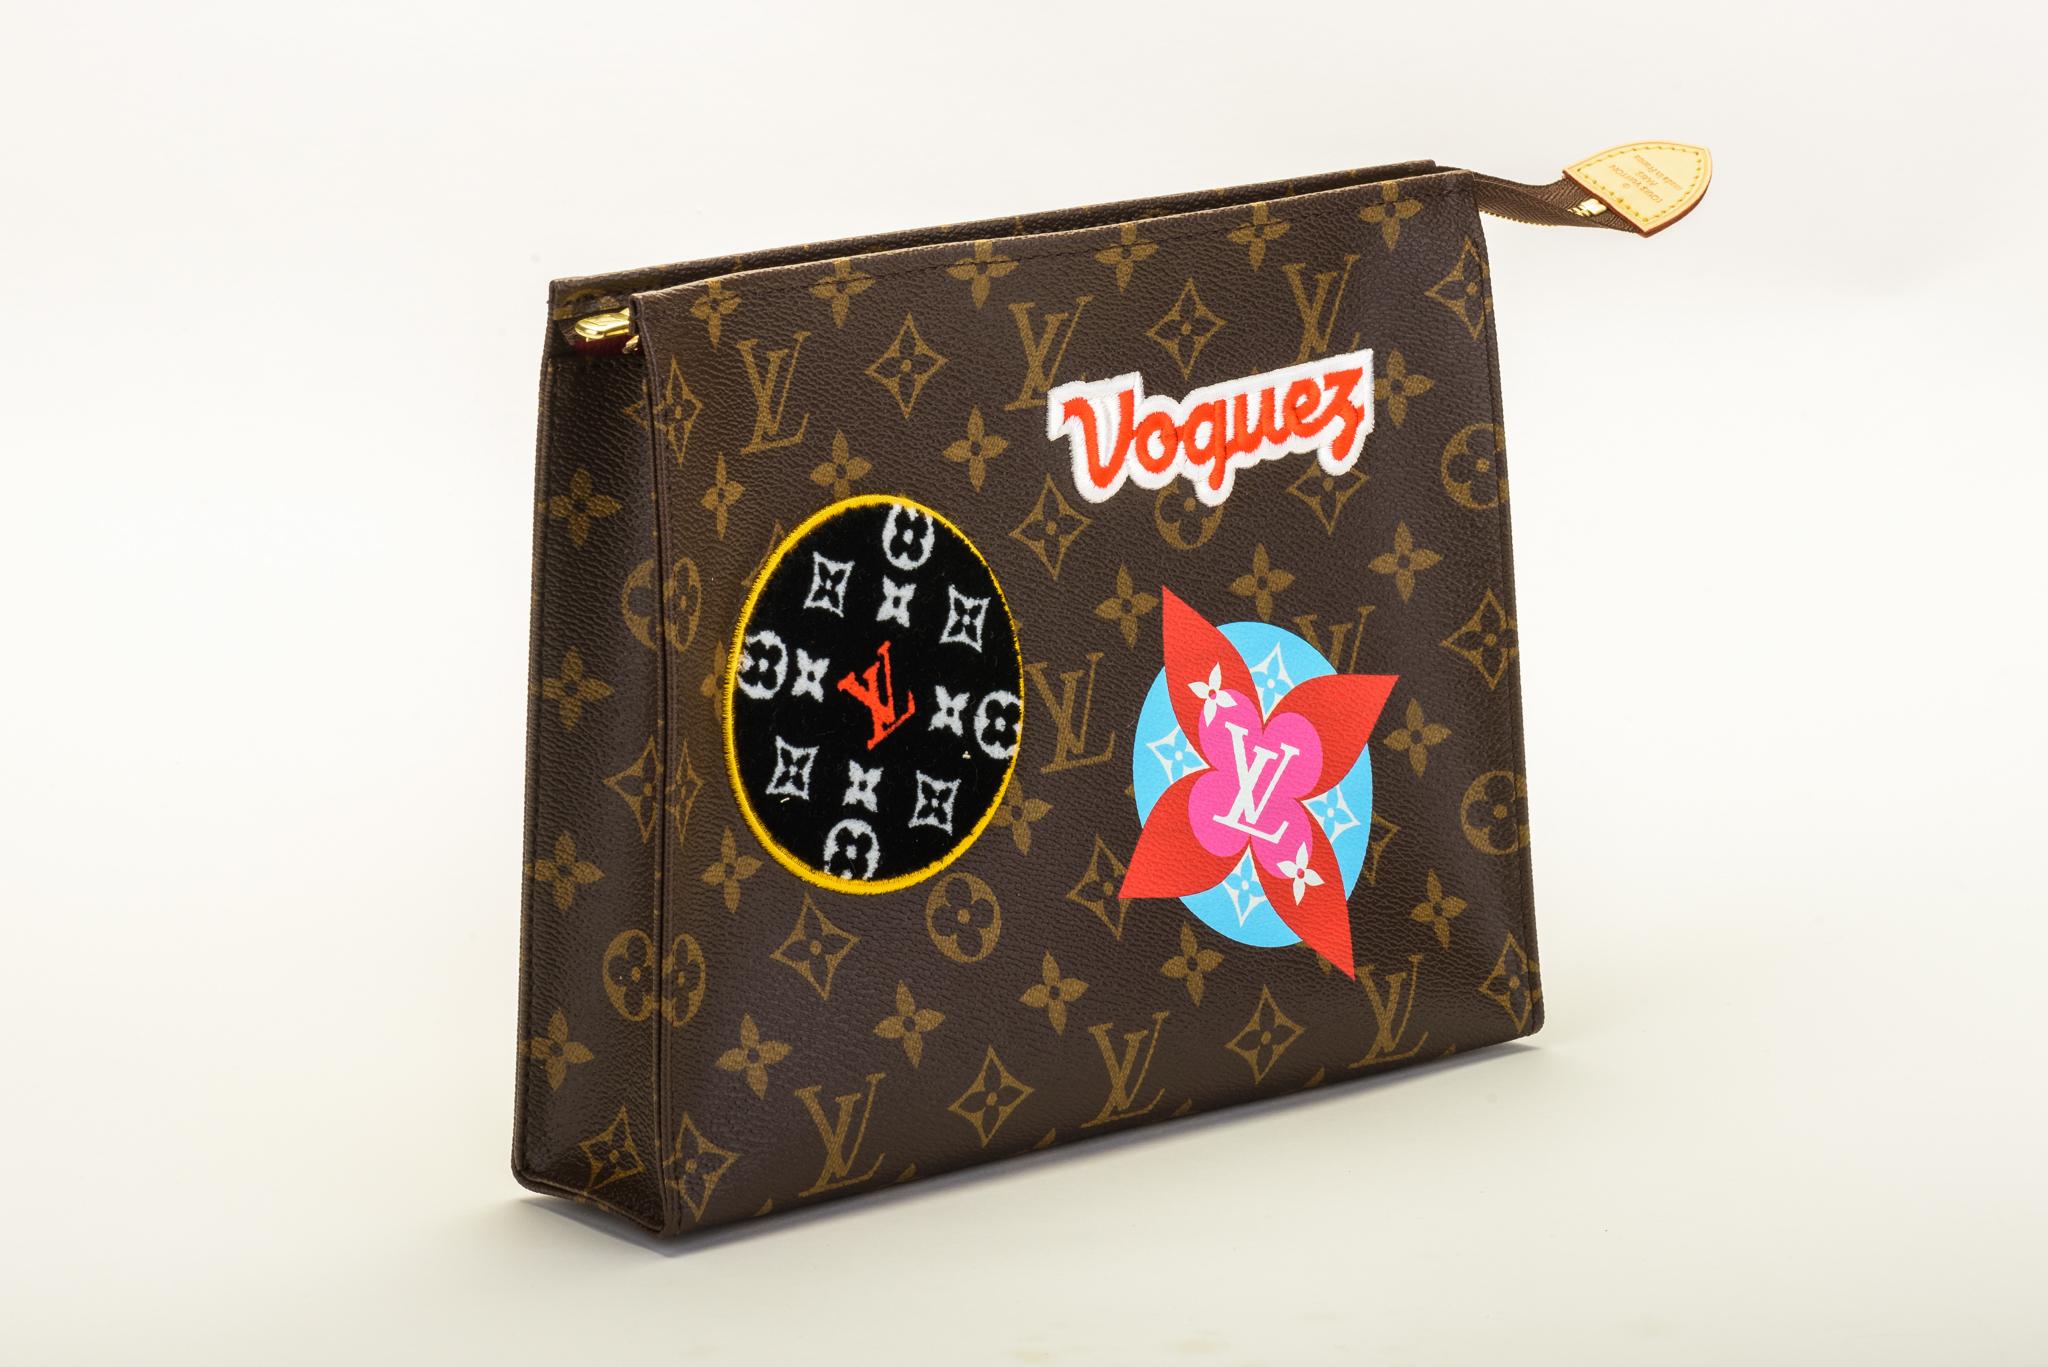 Louis Vuitton limited edition travel stickers pouchette. Sold out everywhere. Comes with dust cover and box.
